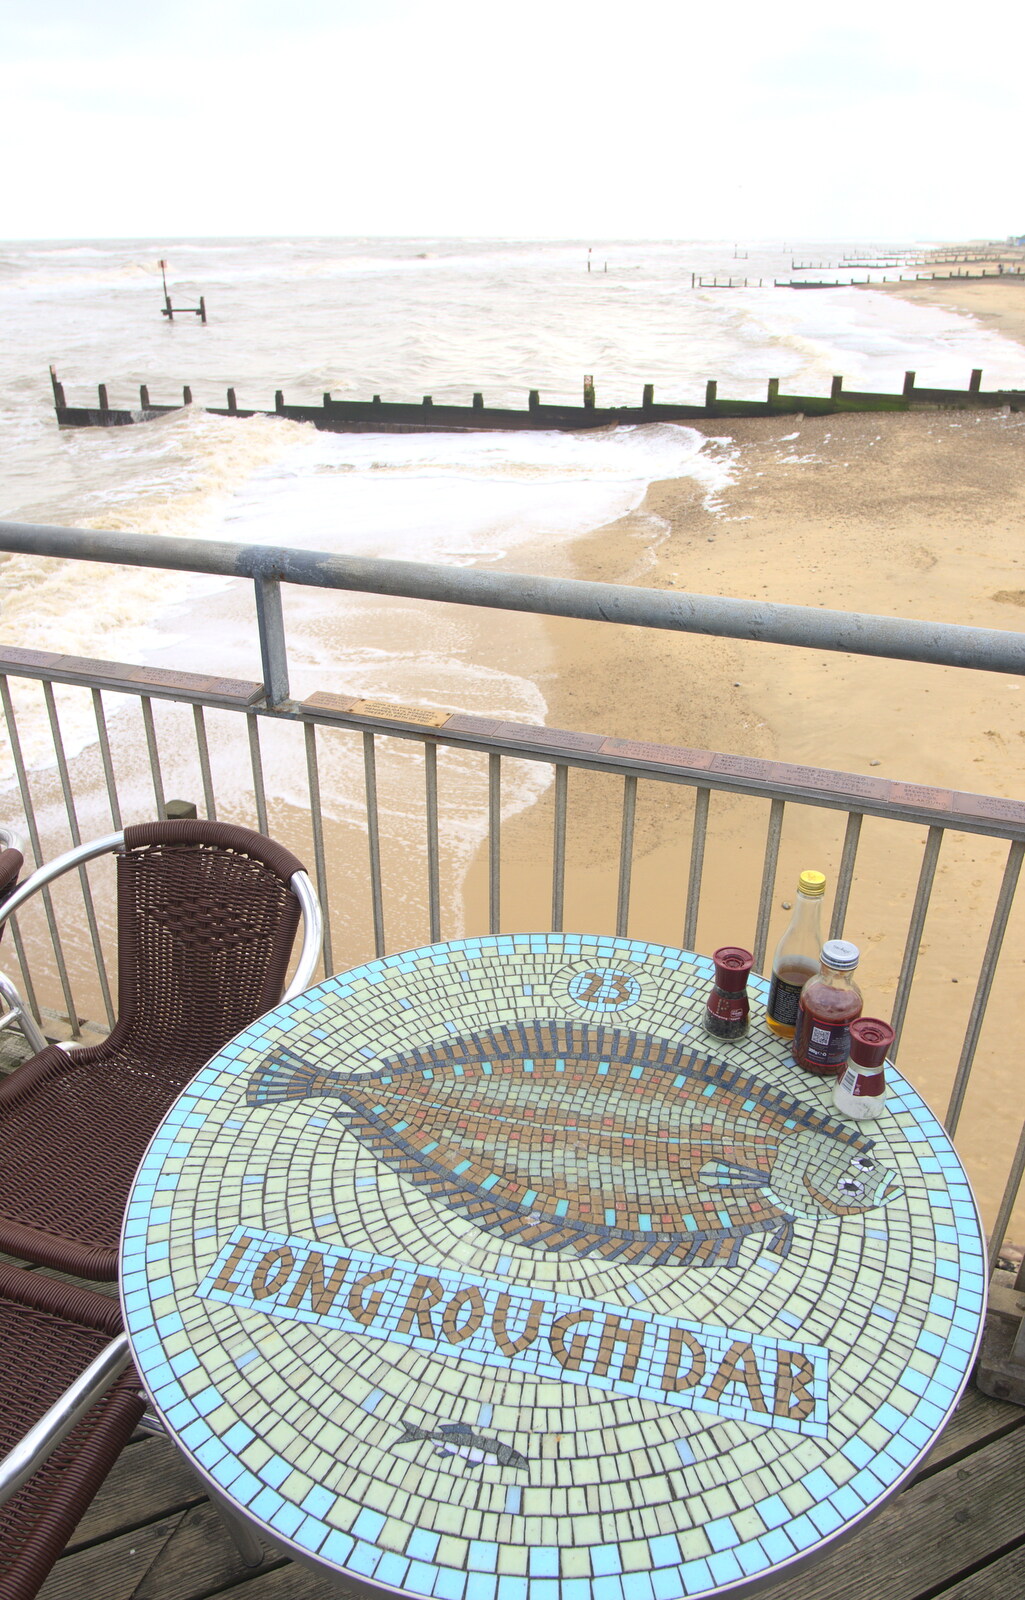 Nice mosaic table on Southwold pier from Southwold By The Sea, Suffolk - 29th September 2013